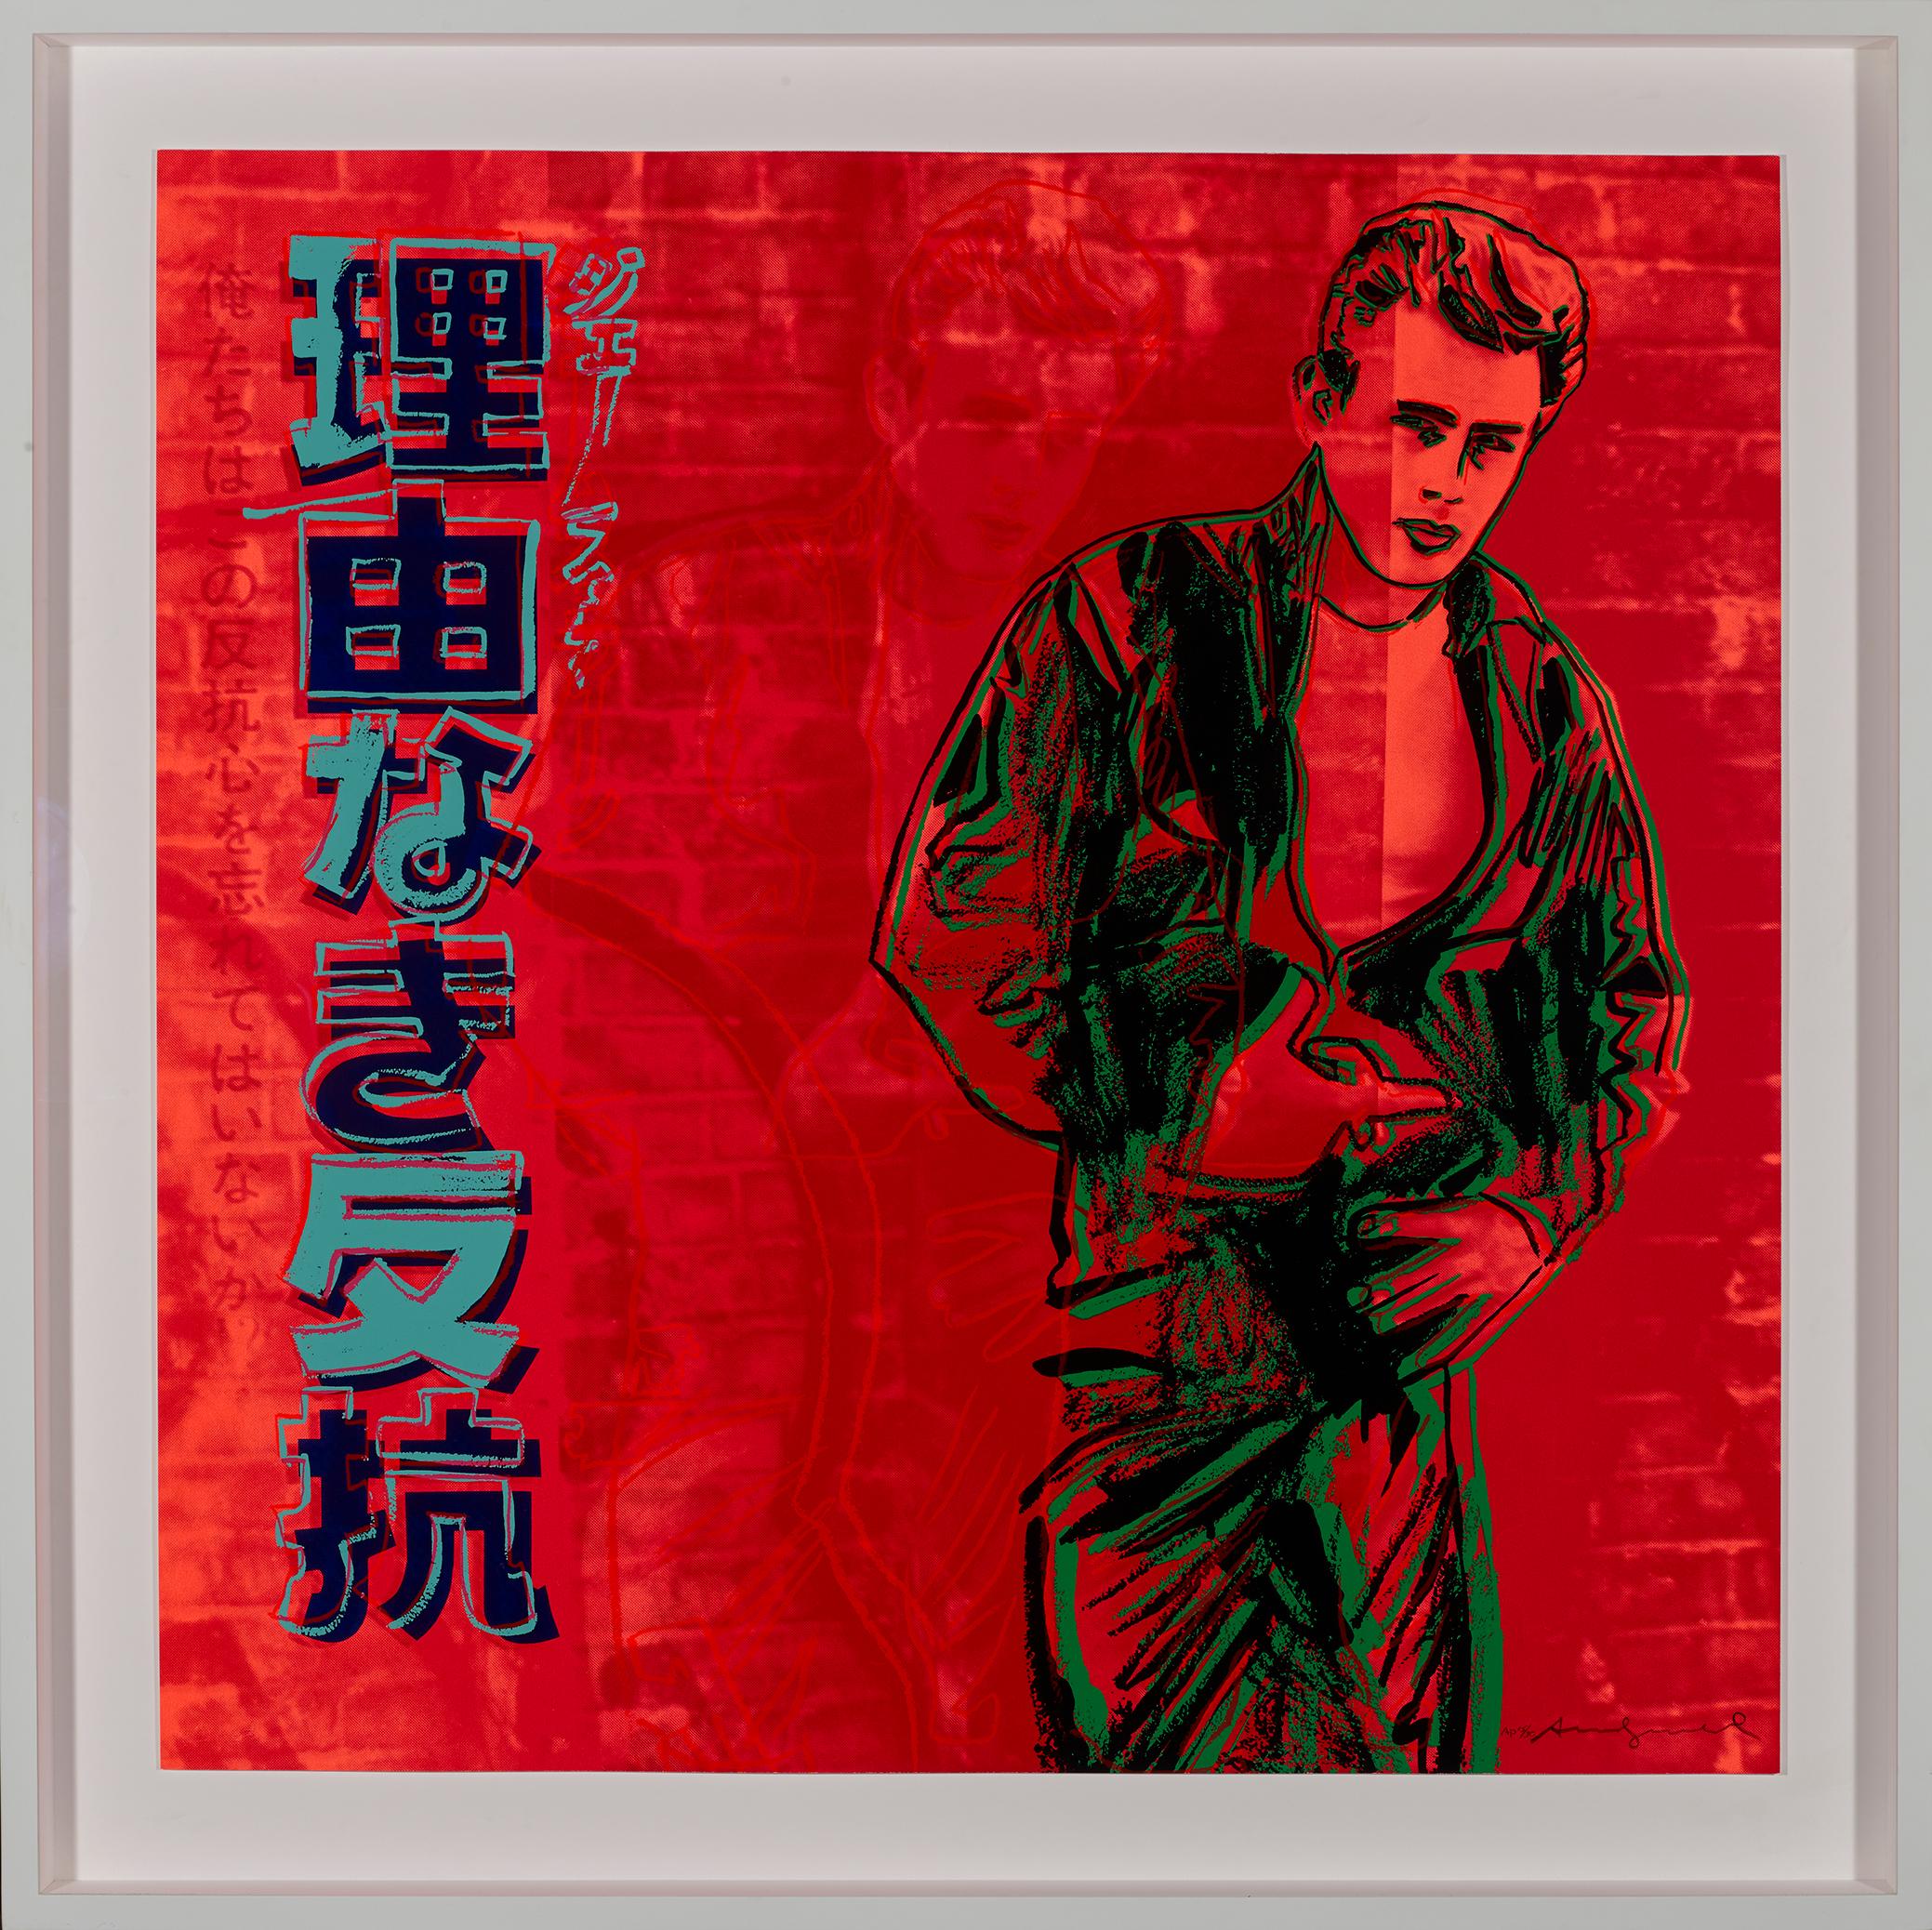 Rebel Without A Cause (James Dean) F&S II.355 - Print by Andy Warhol